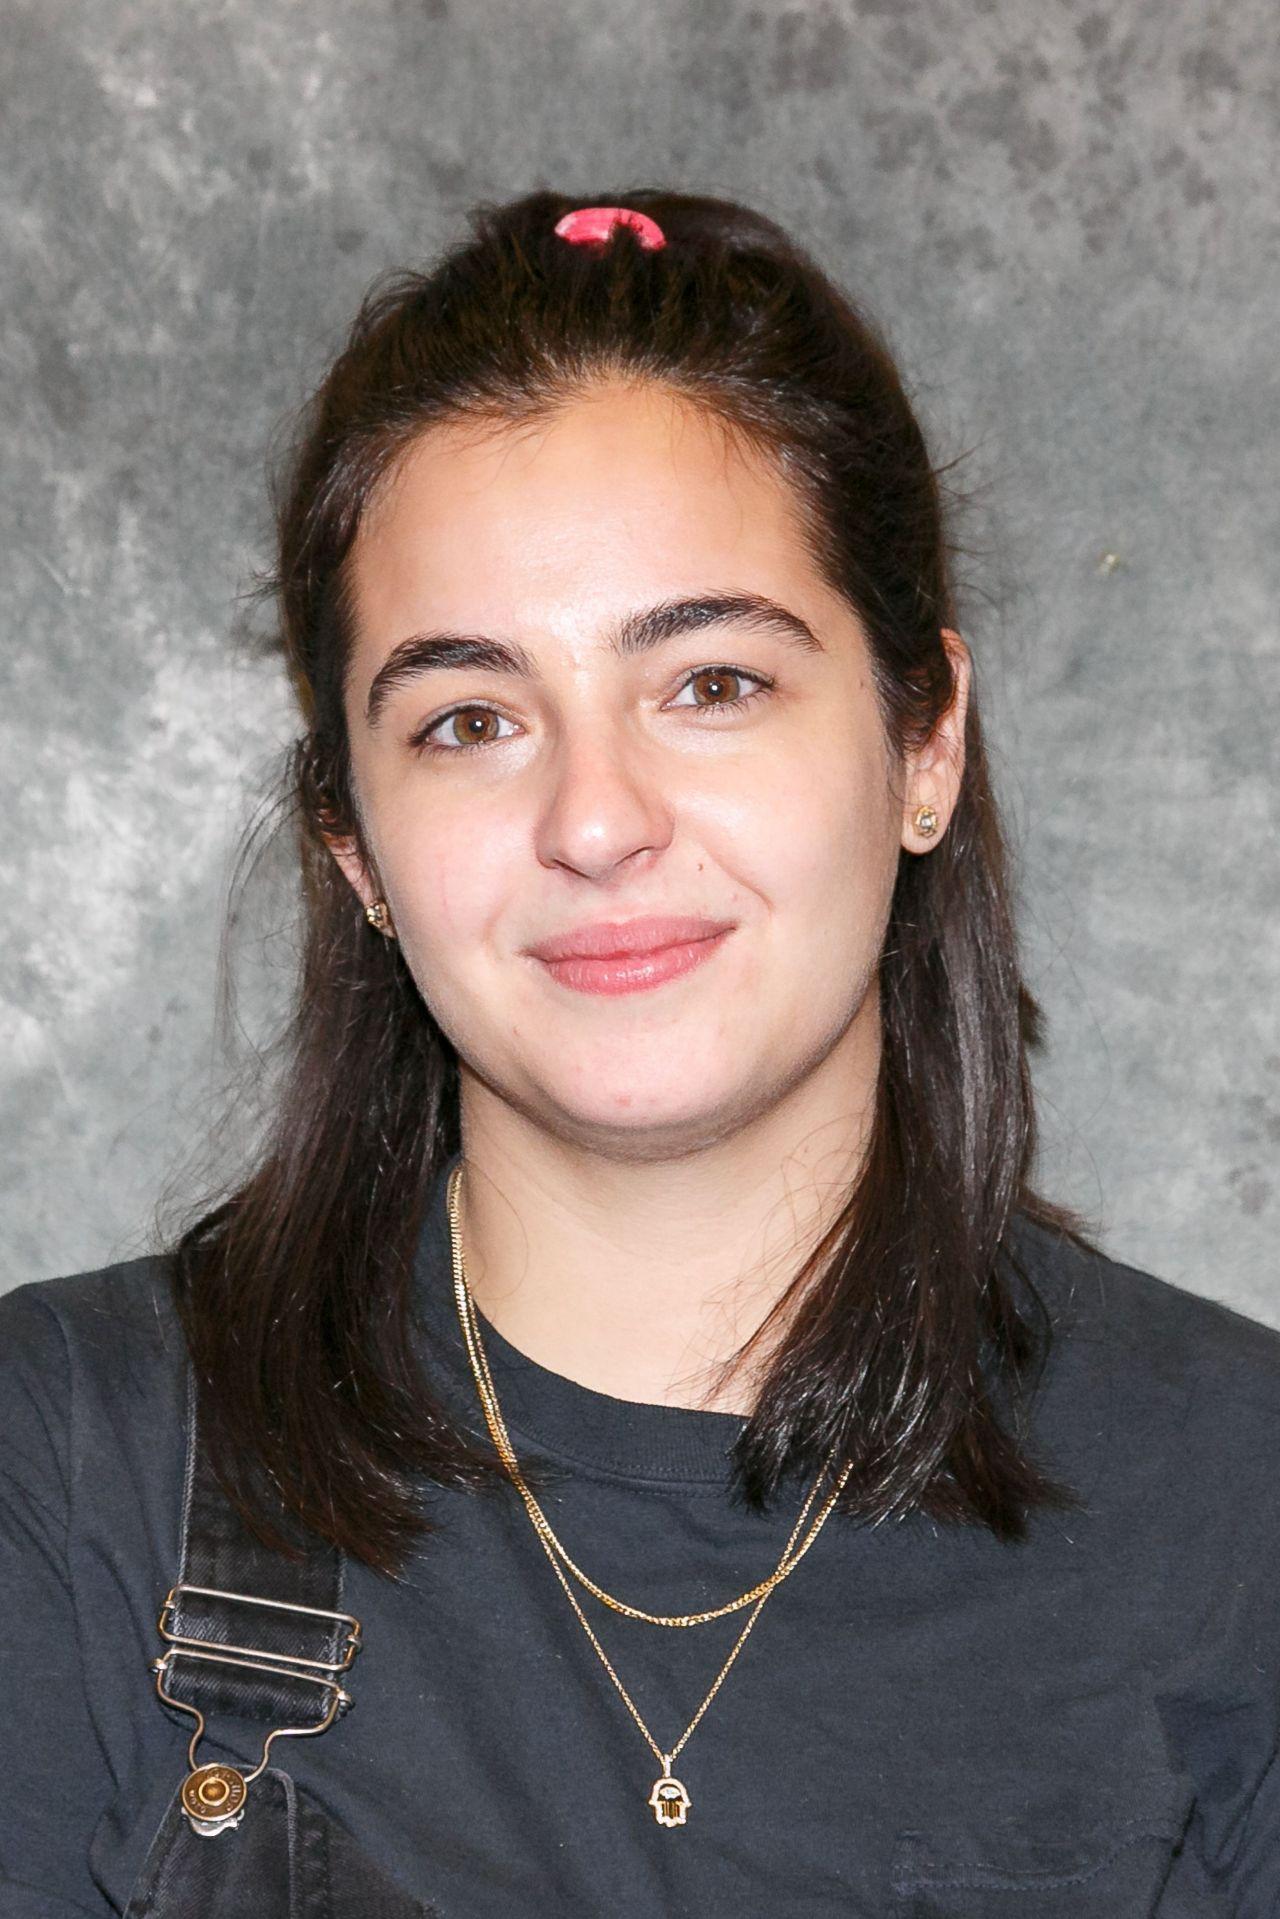 70+ Hot Pictures Of Alanna Masterson Which Are Here To Rock Your World 35